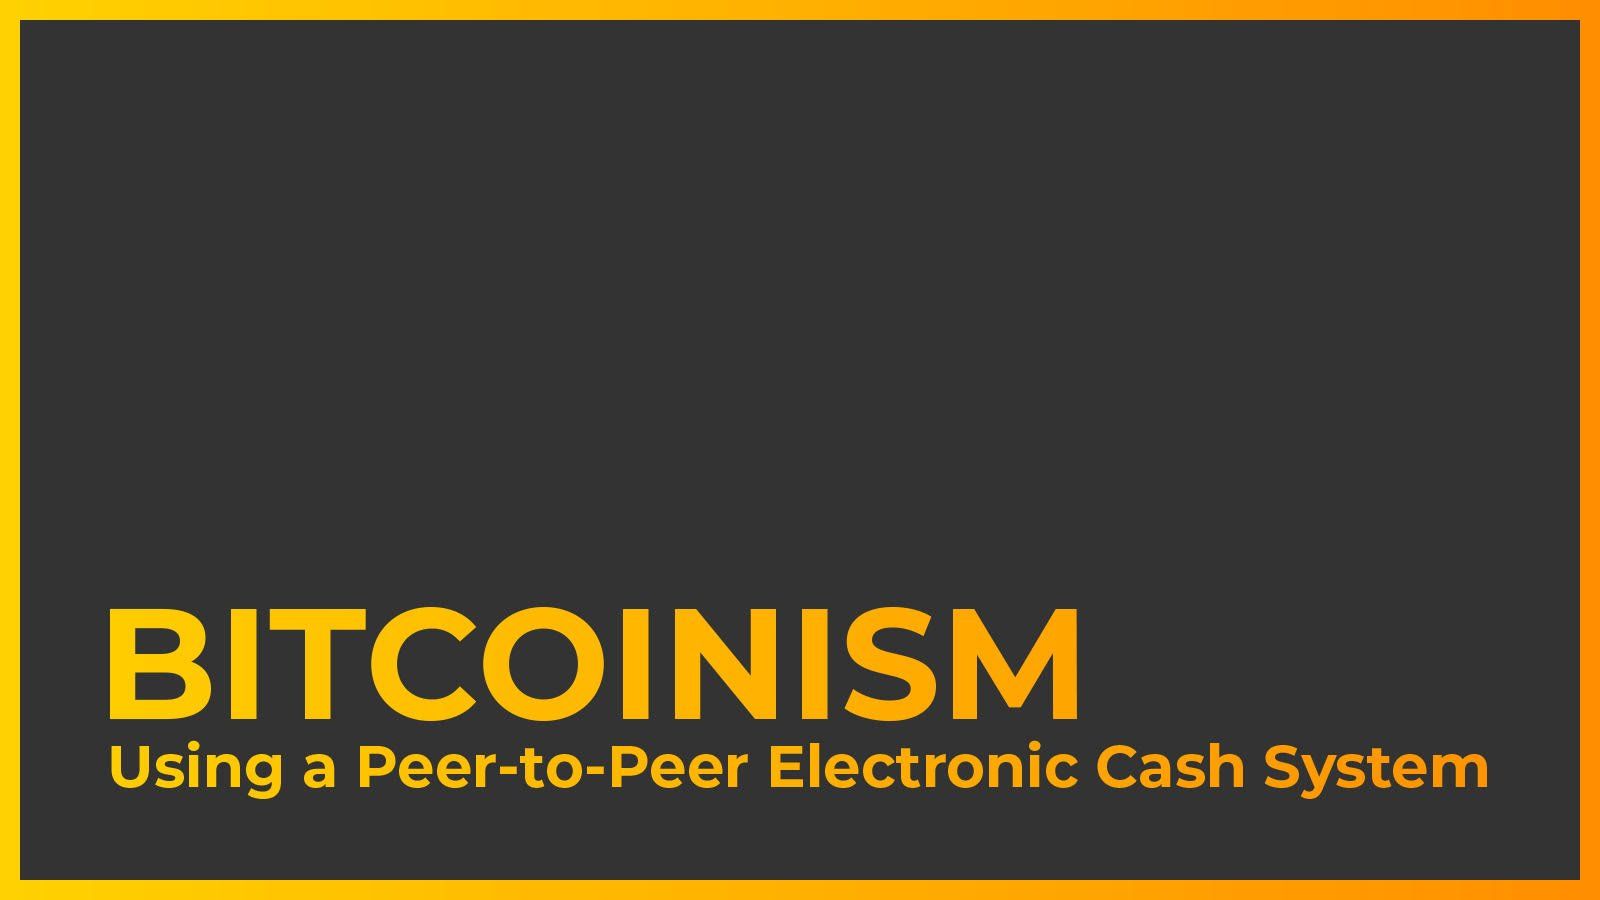 BITCOINISM: Using a Peer-to-Peer Electronic Cash System